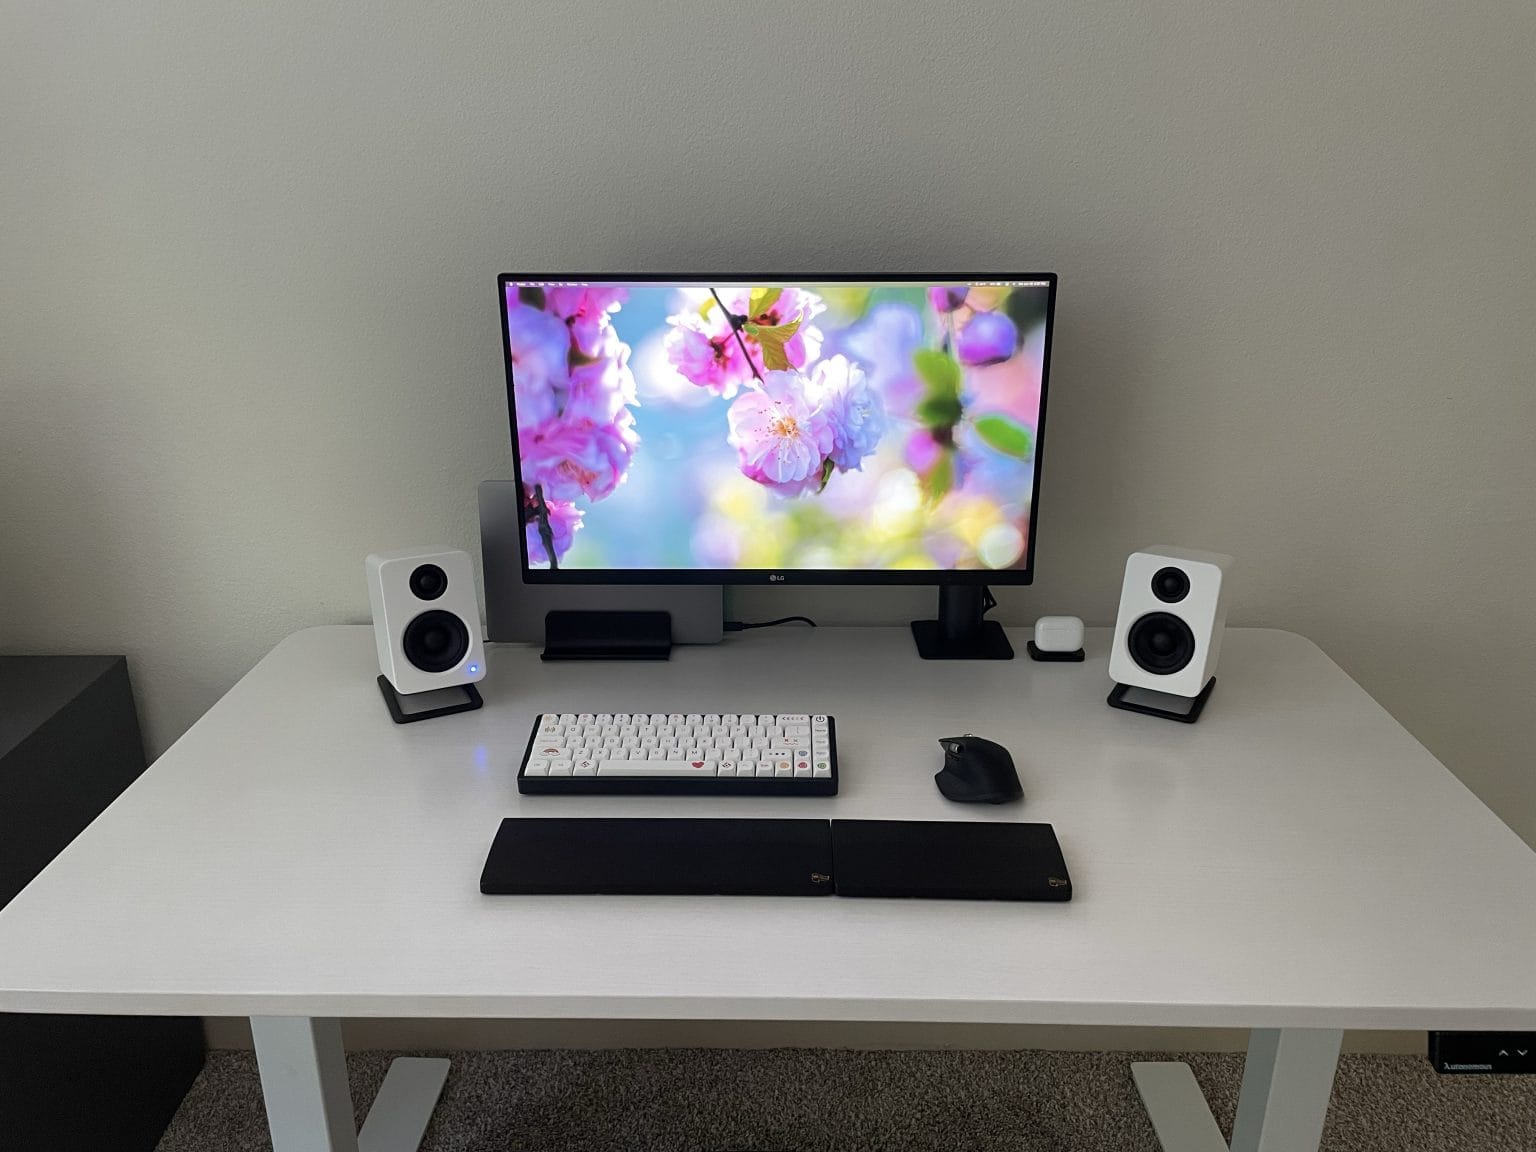 The laptop's not the only thing about this setup that feels light.